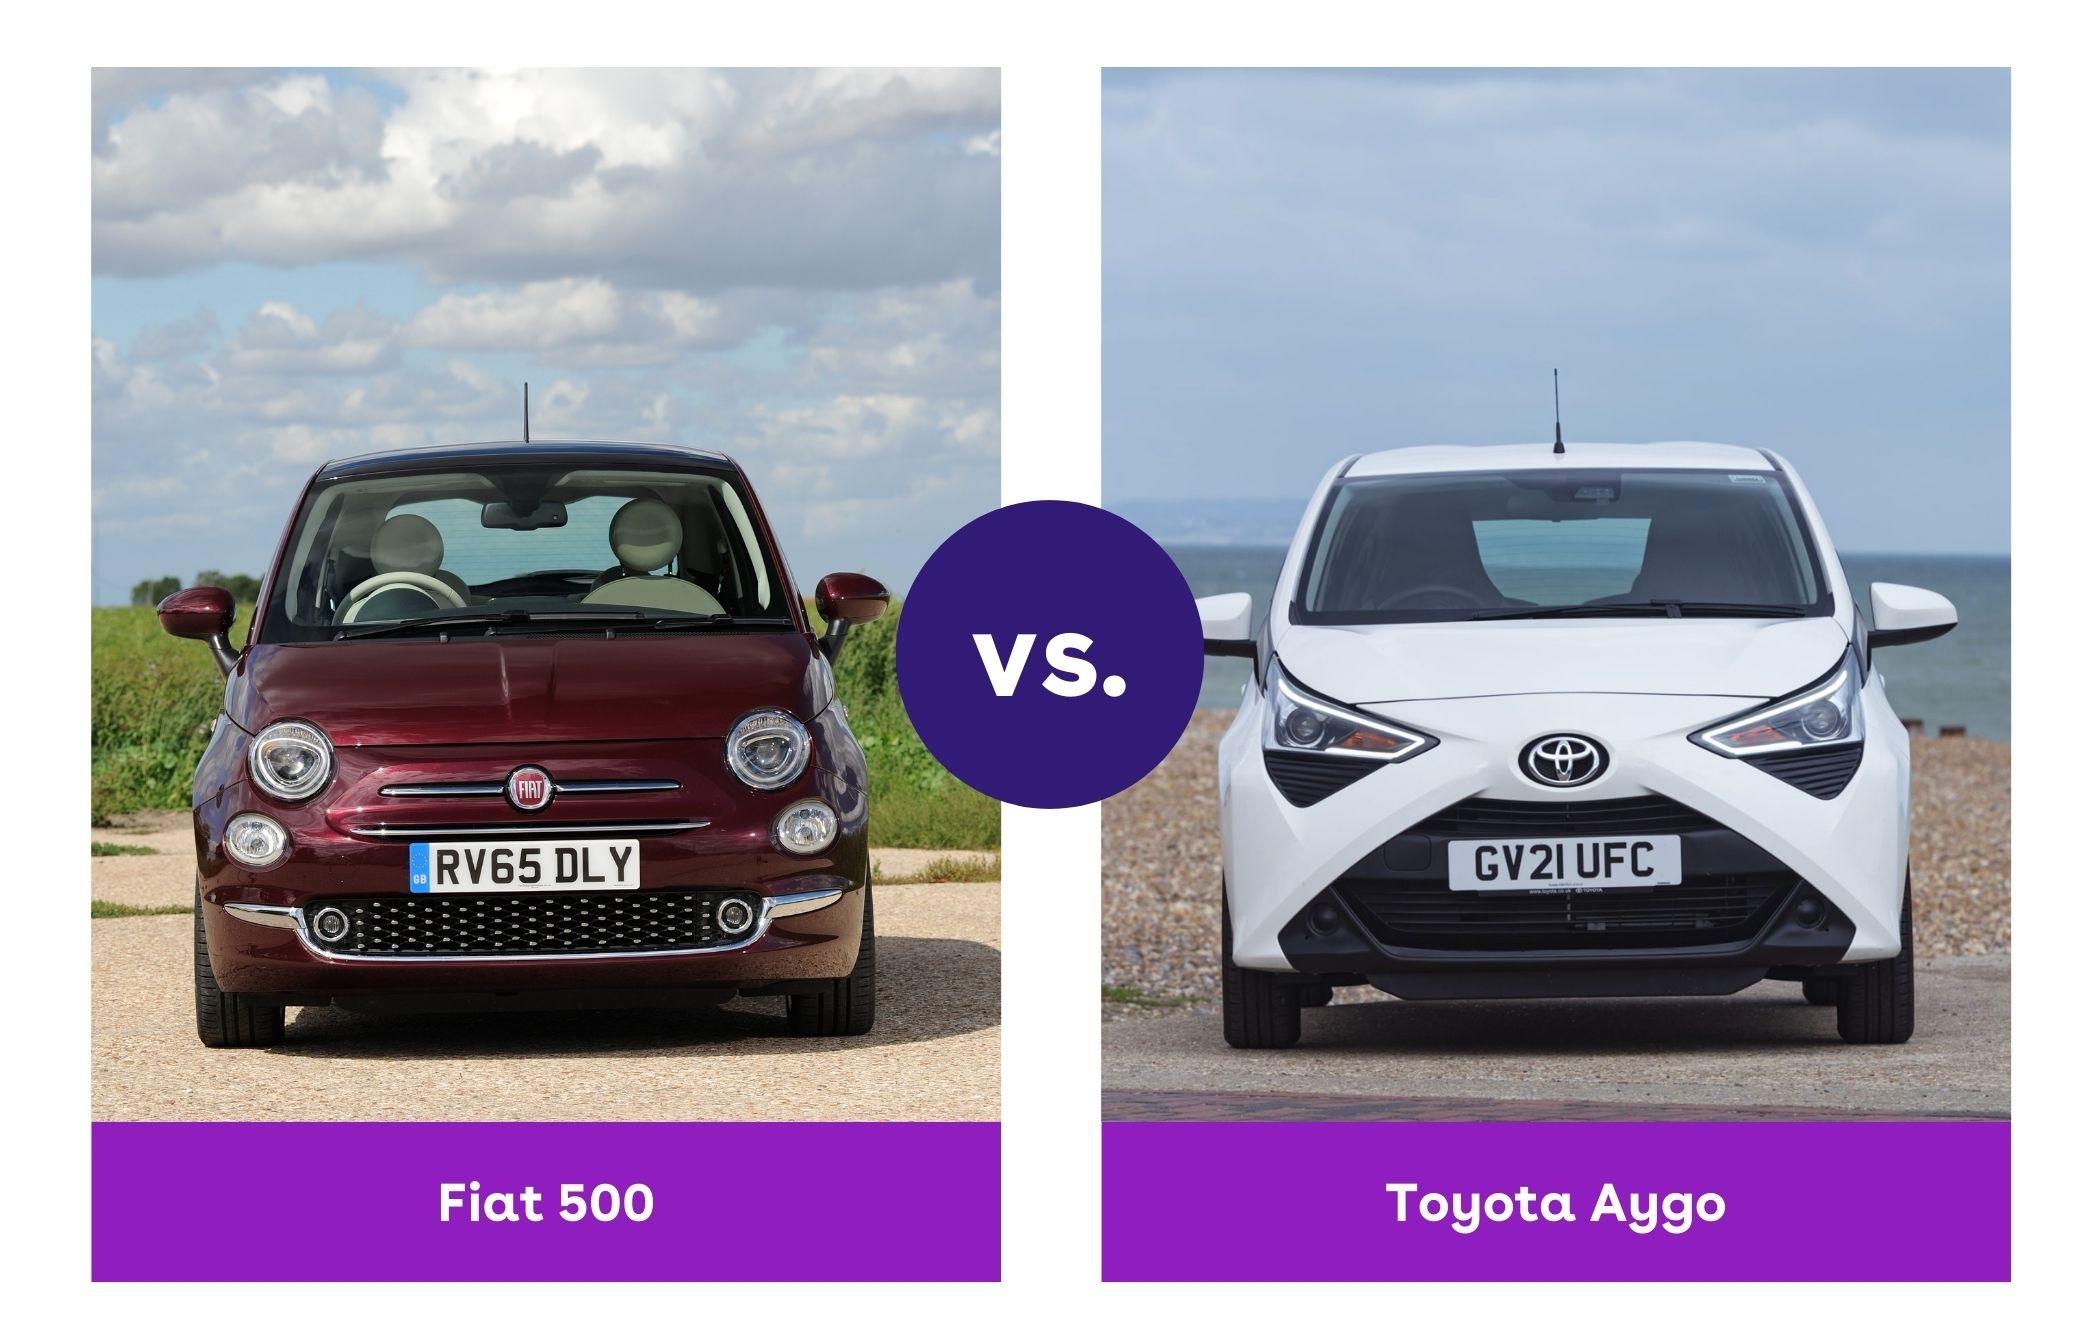 Side-by-side view of Fiat 500 and Toyota Aygo front